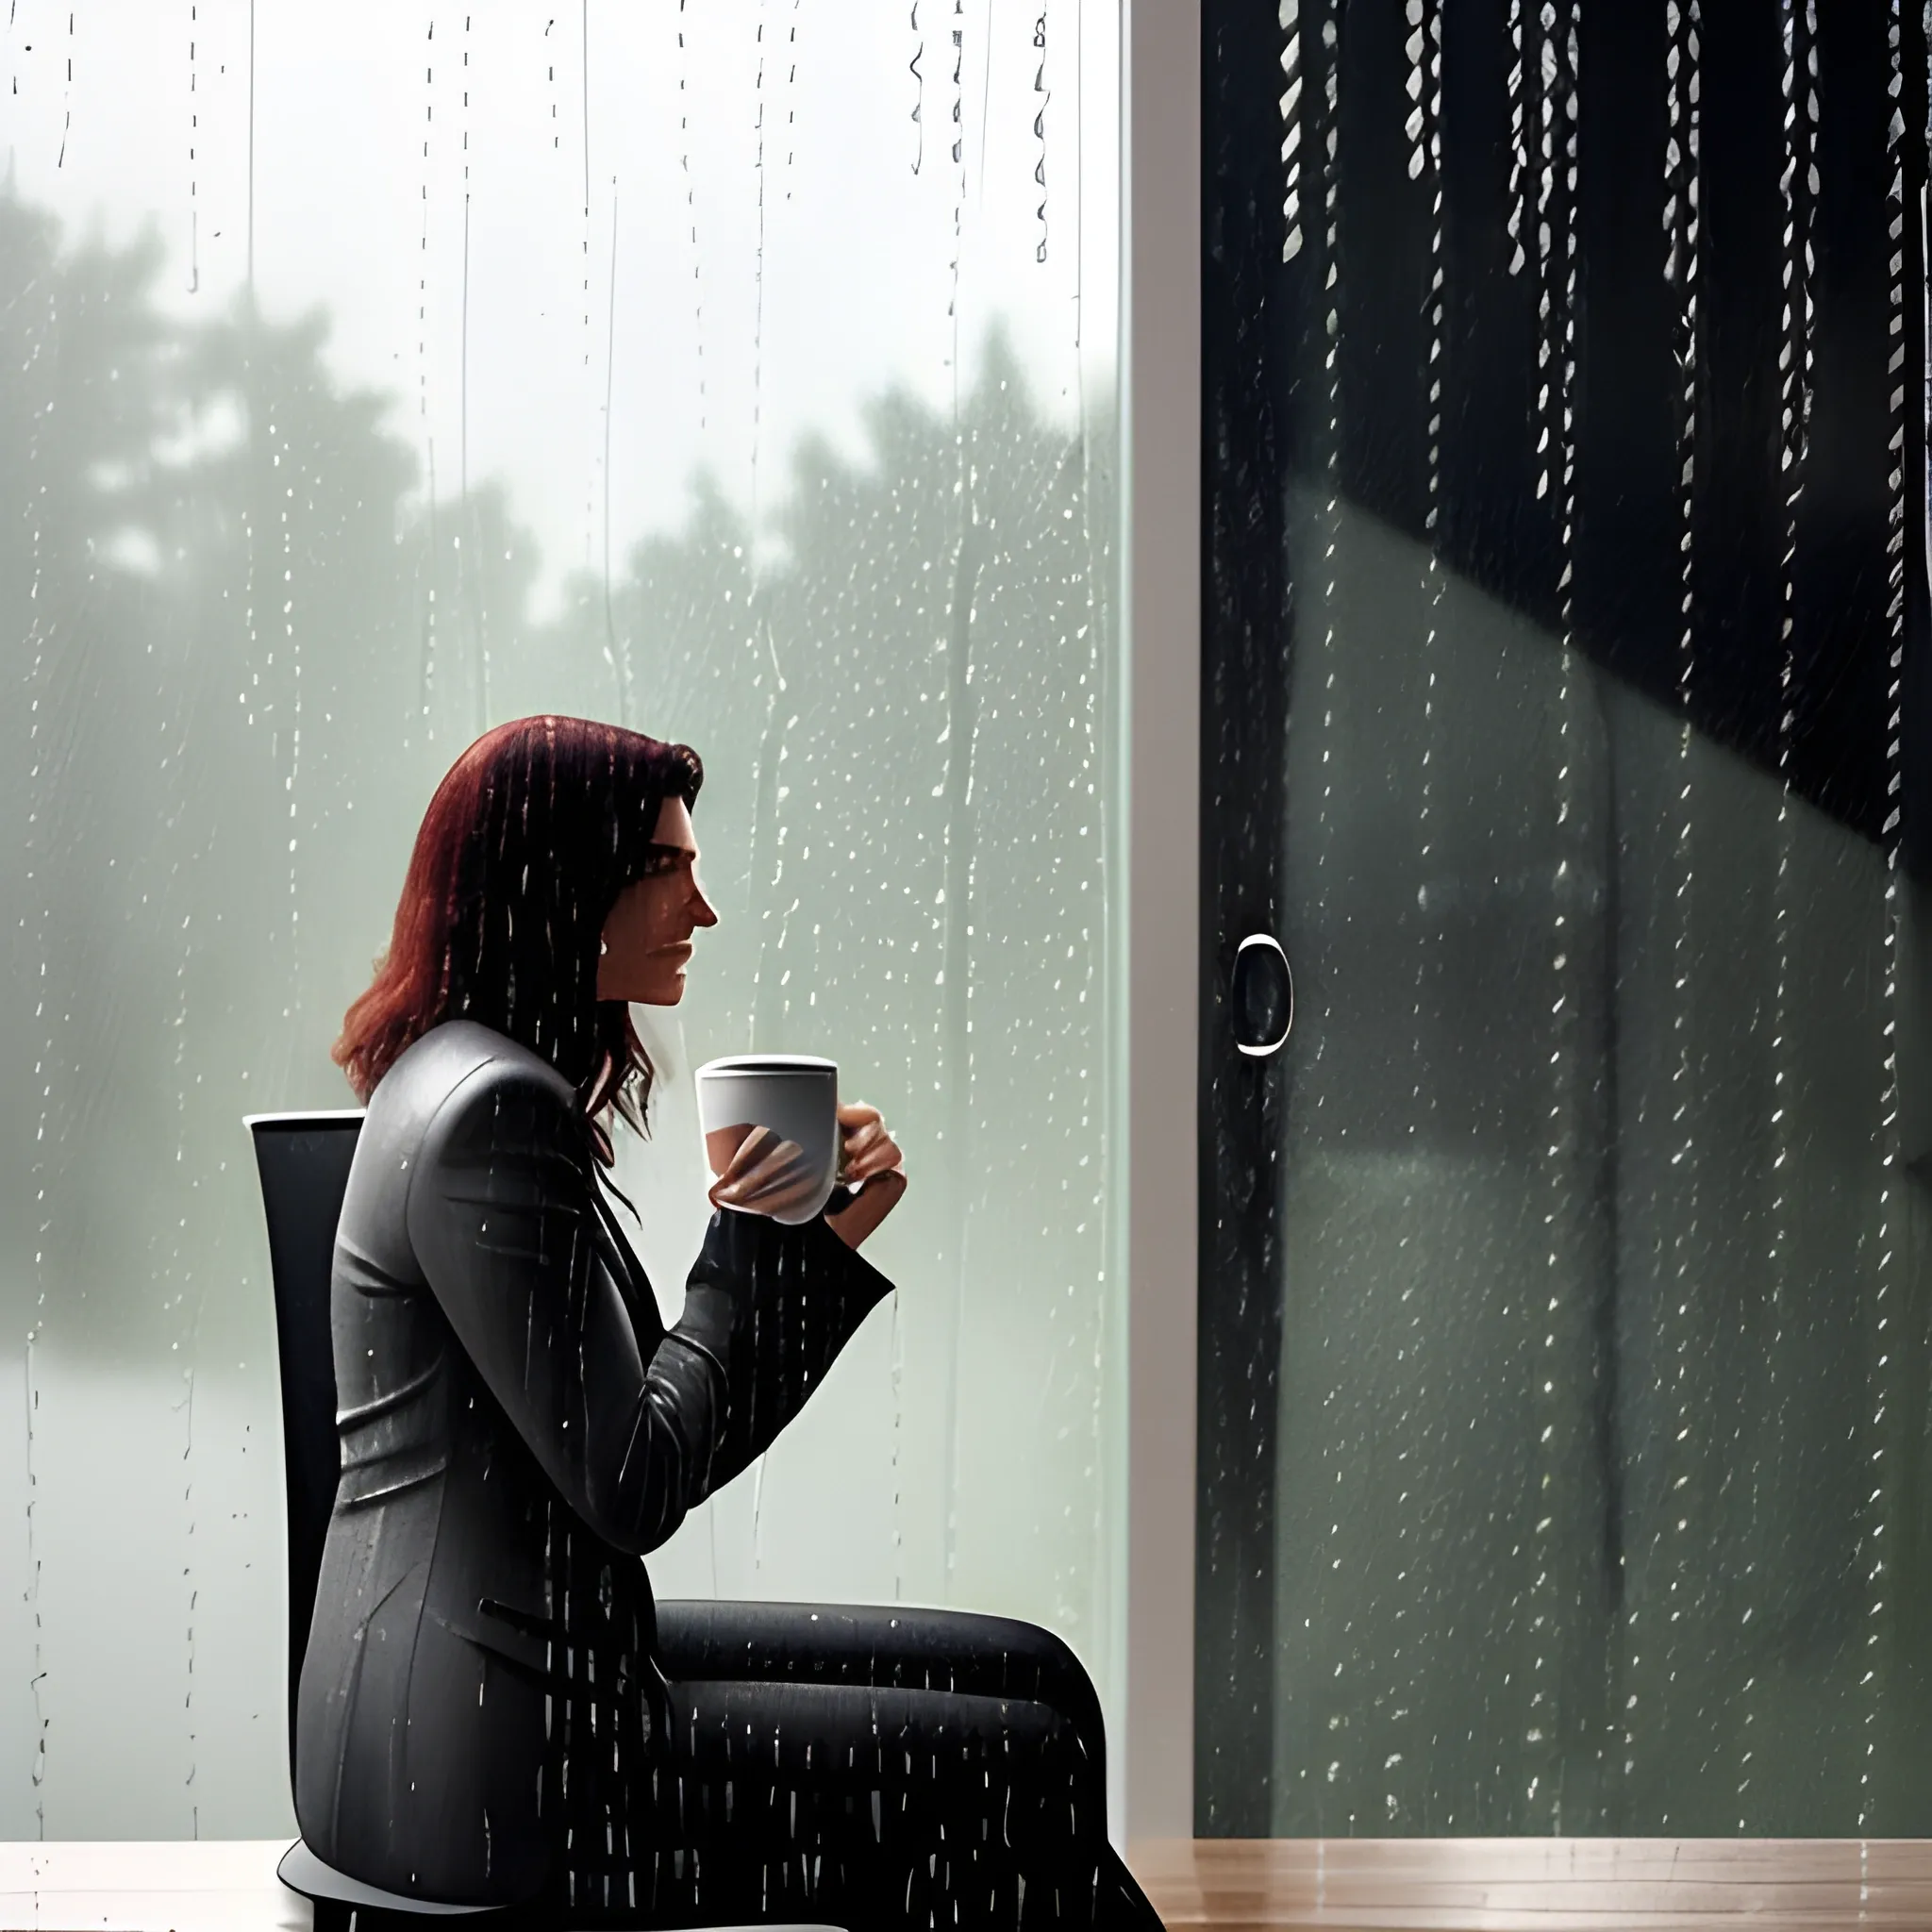 a young woman watches the rain falling heavy while sitting calmly drinking her coffee, outside of rain window 